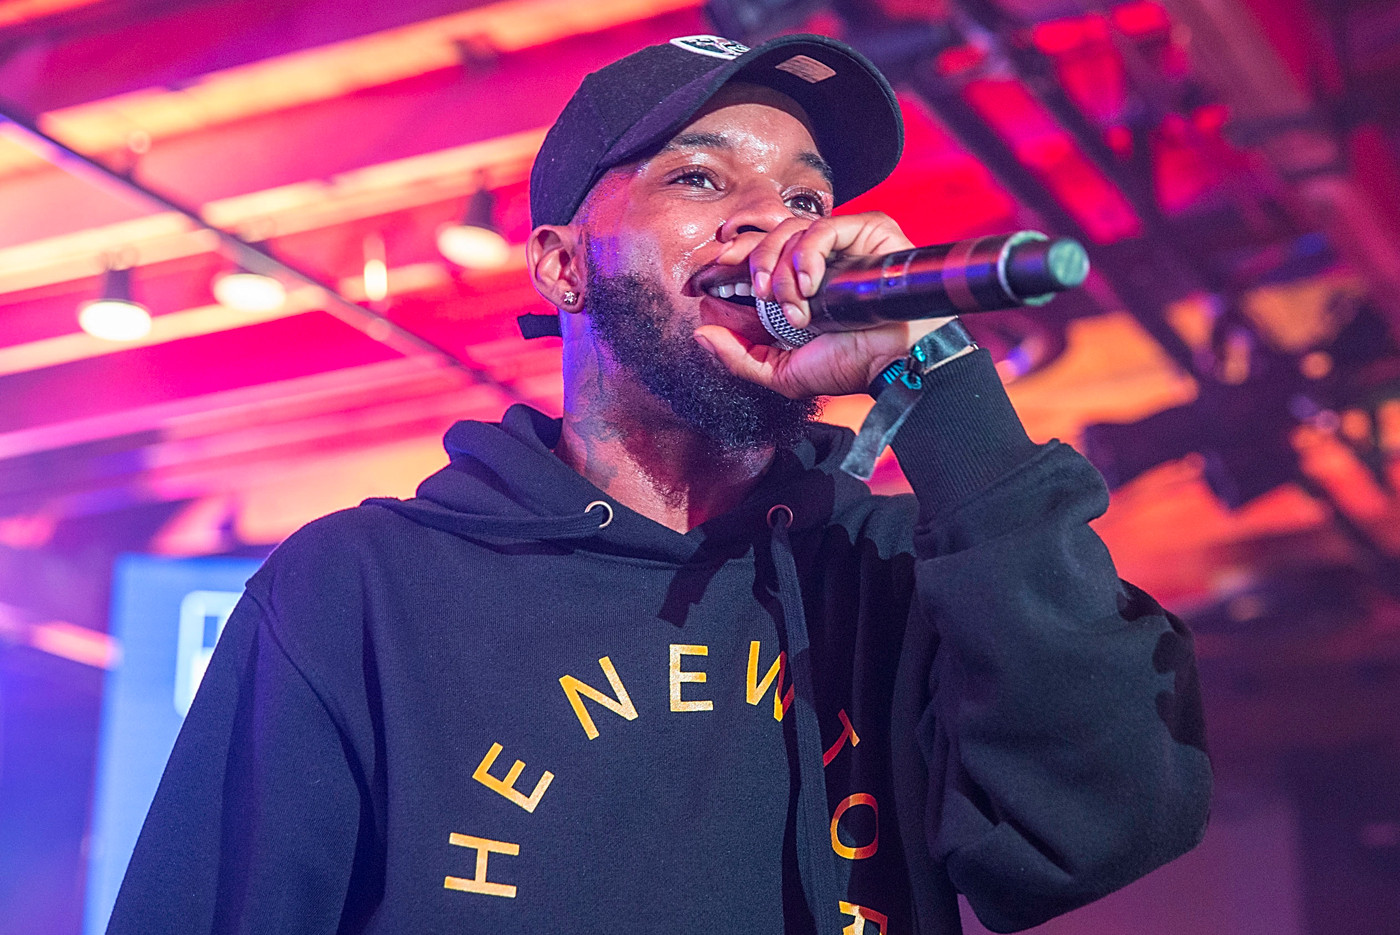 New Music: Tory Lanez - Pop Out (Freestyle)